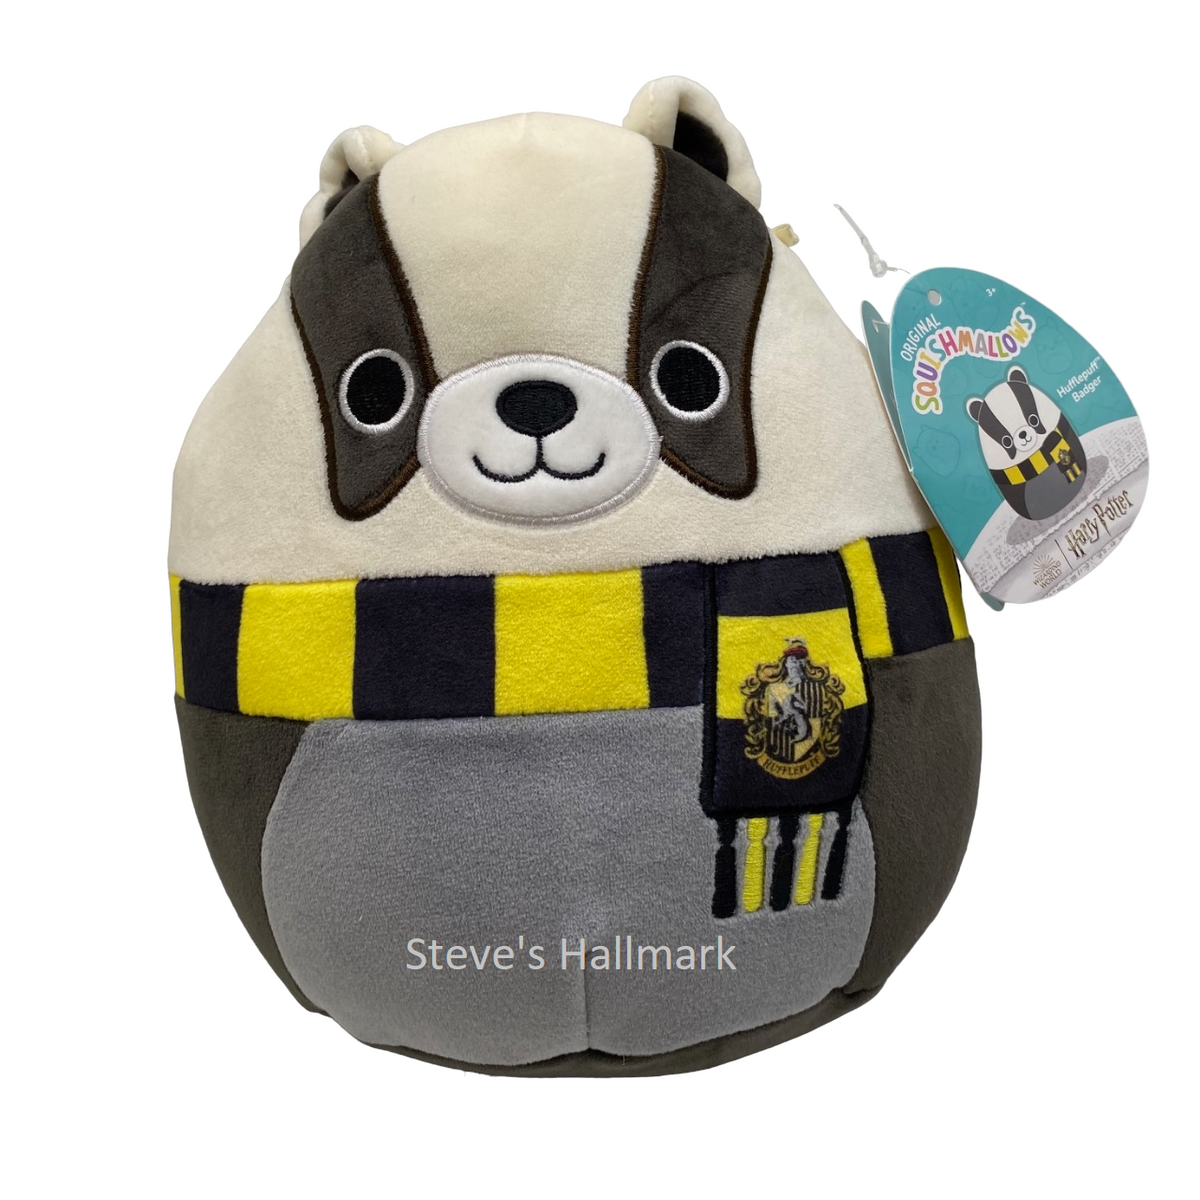 Squishmallow Harry Potter Hogwarts House Hufflepuff Badger 10 Inch